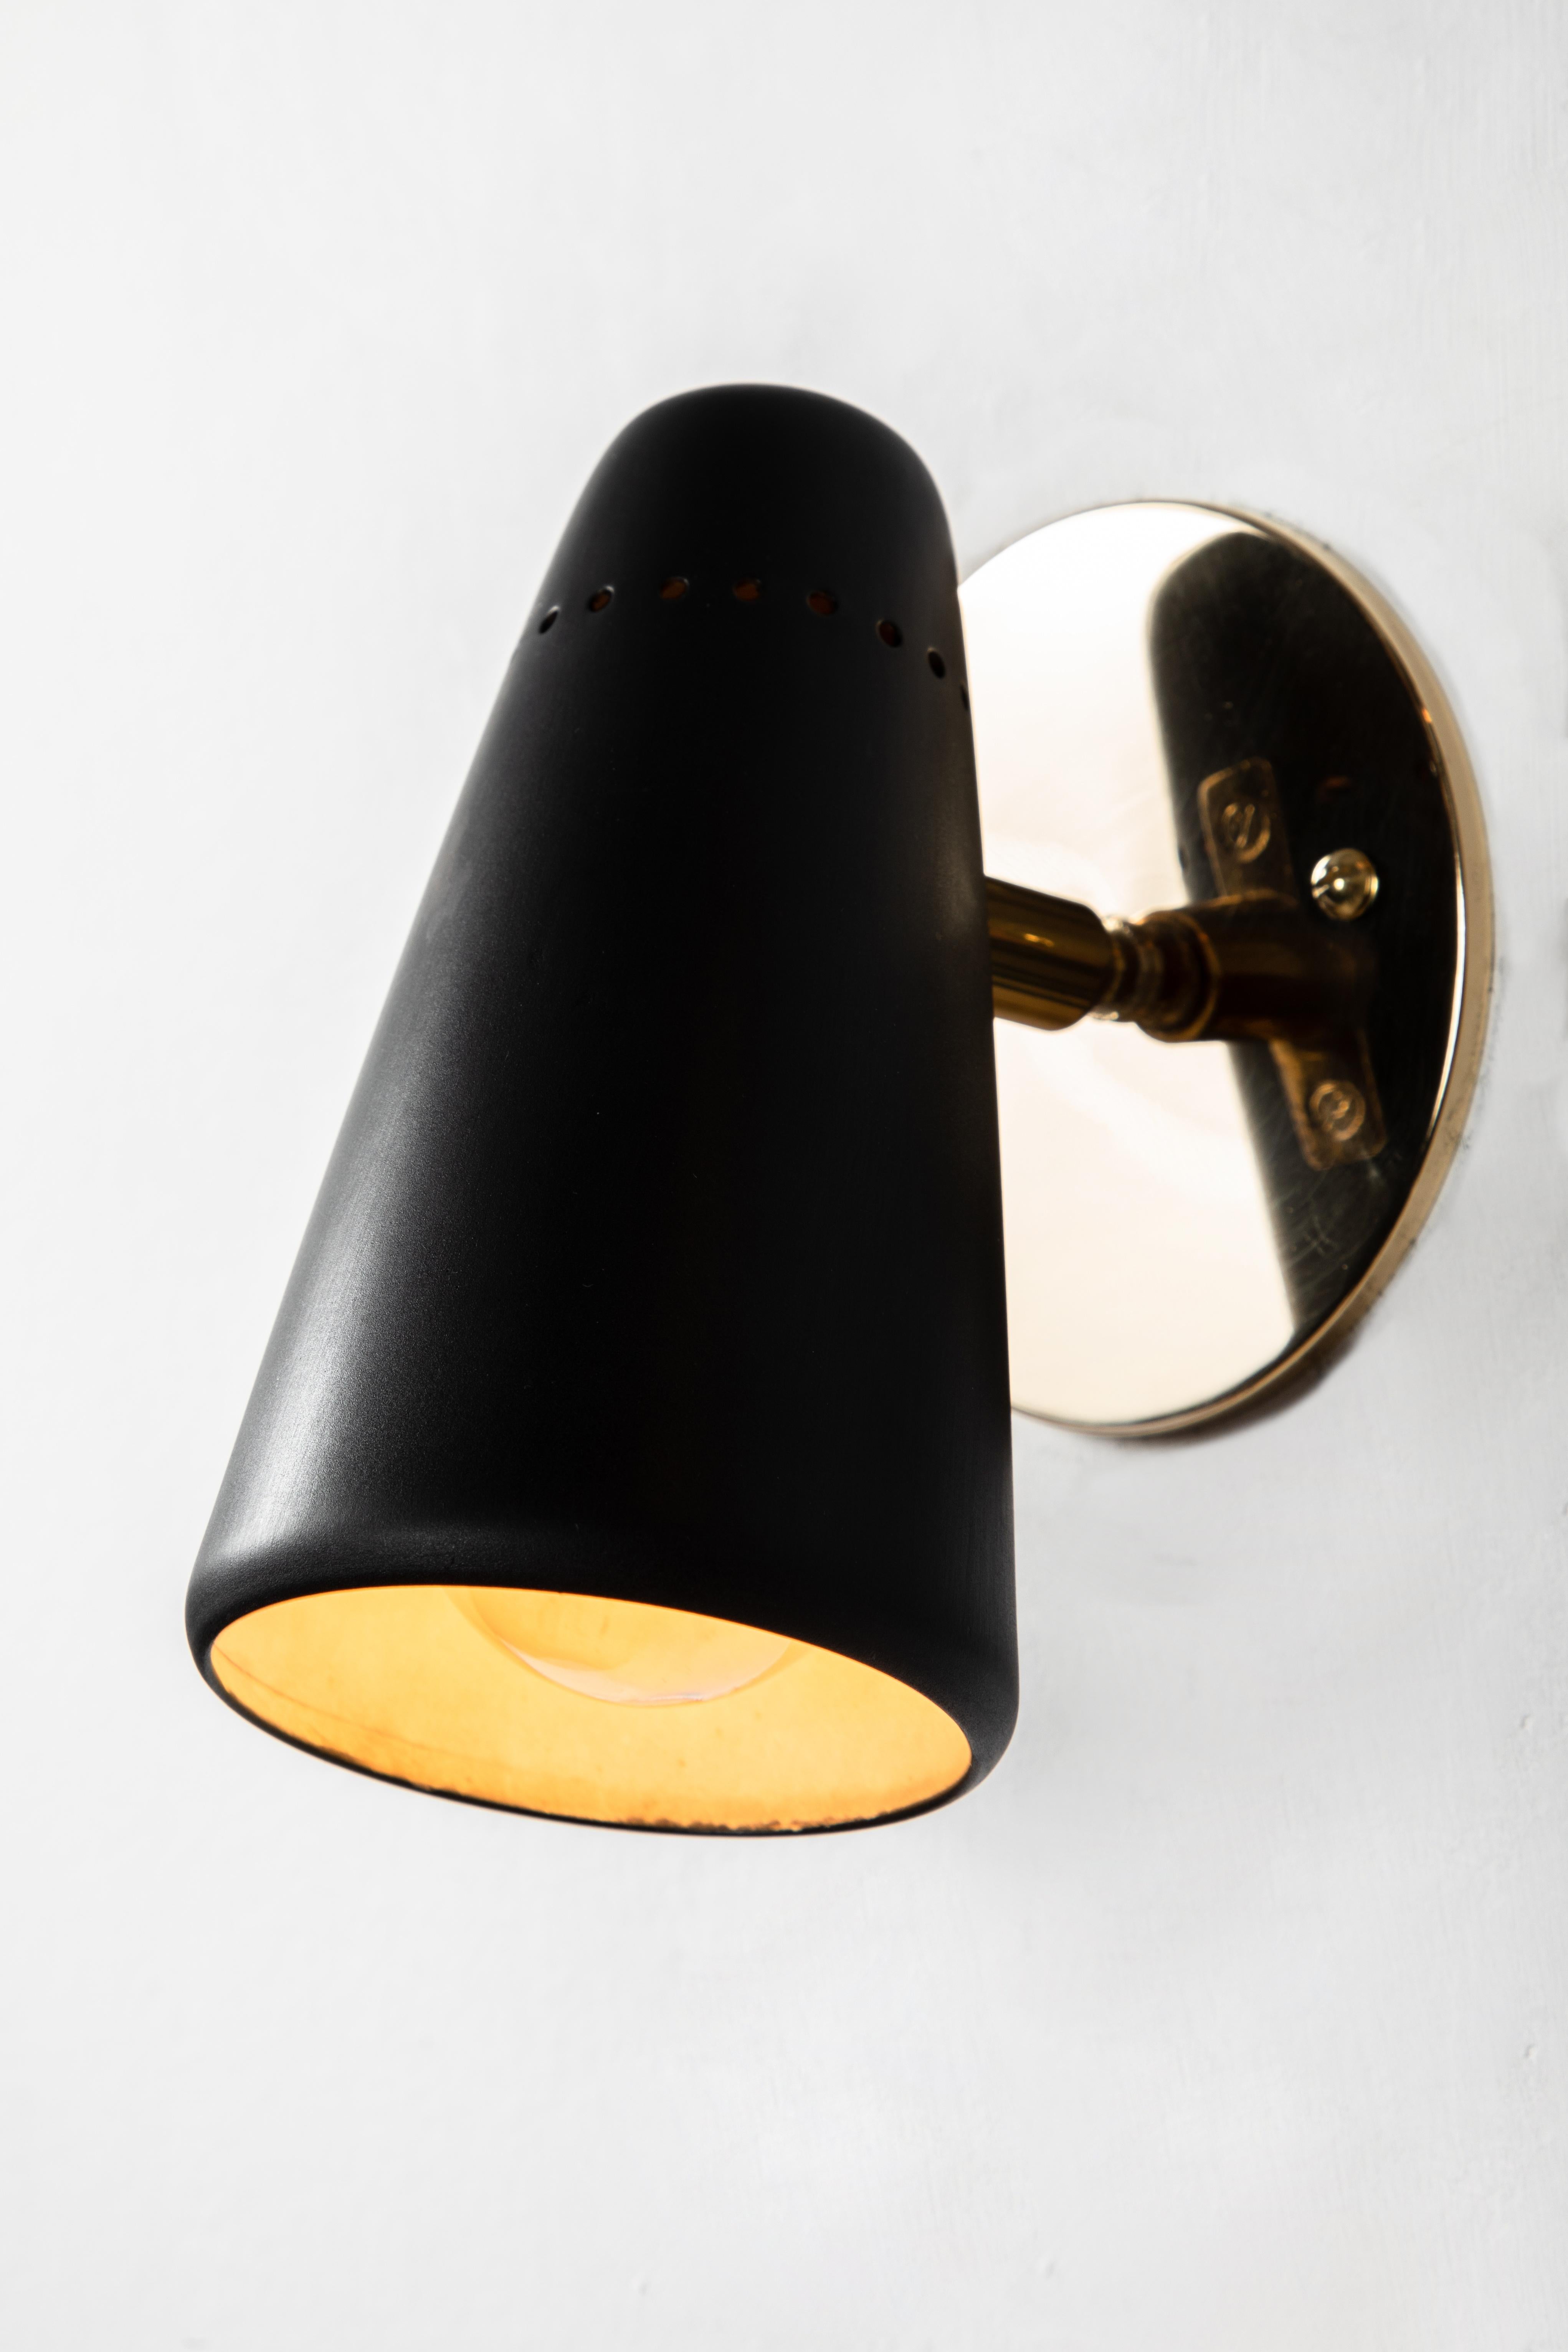 Mid-20th Century 1950s Stilnovo Sconces in Black and Brass with Yellow Label